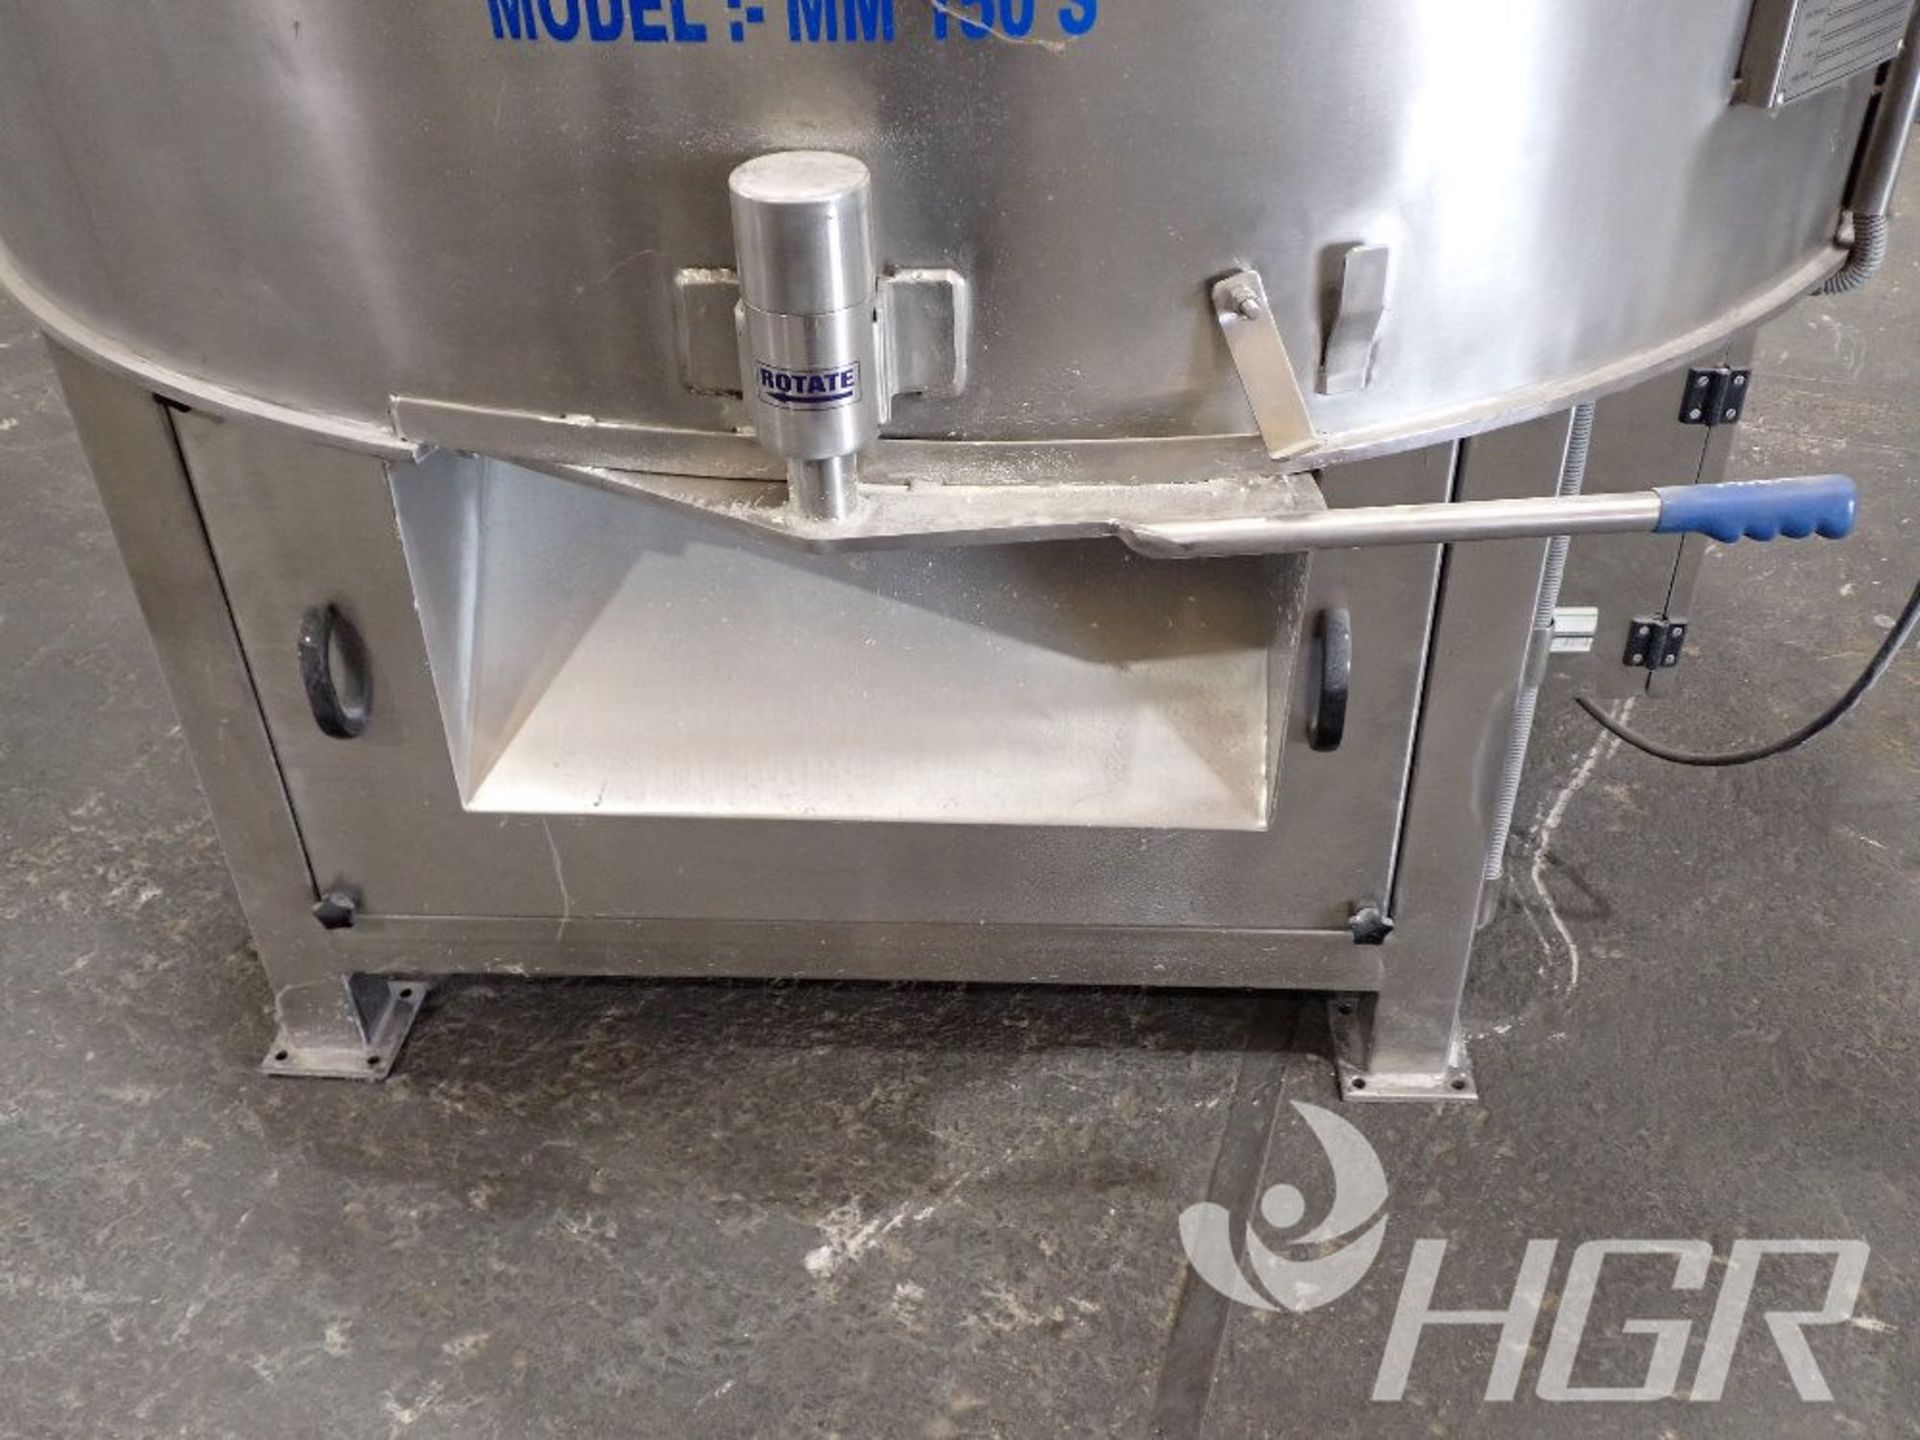 PLEDGE INTERNATIONAL MULLER MIXER, Model MM 150 S, Date: 2021; s/n 1120, Approx. Capacity: 60X60X19, - Image 5 of 18